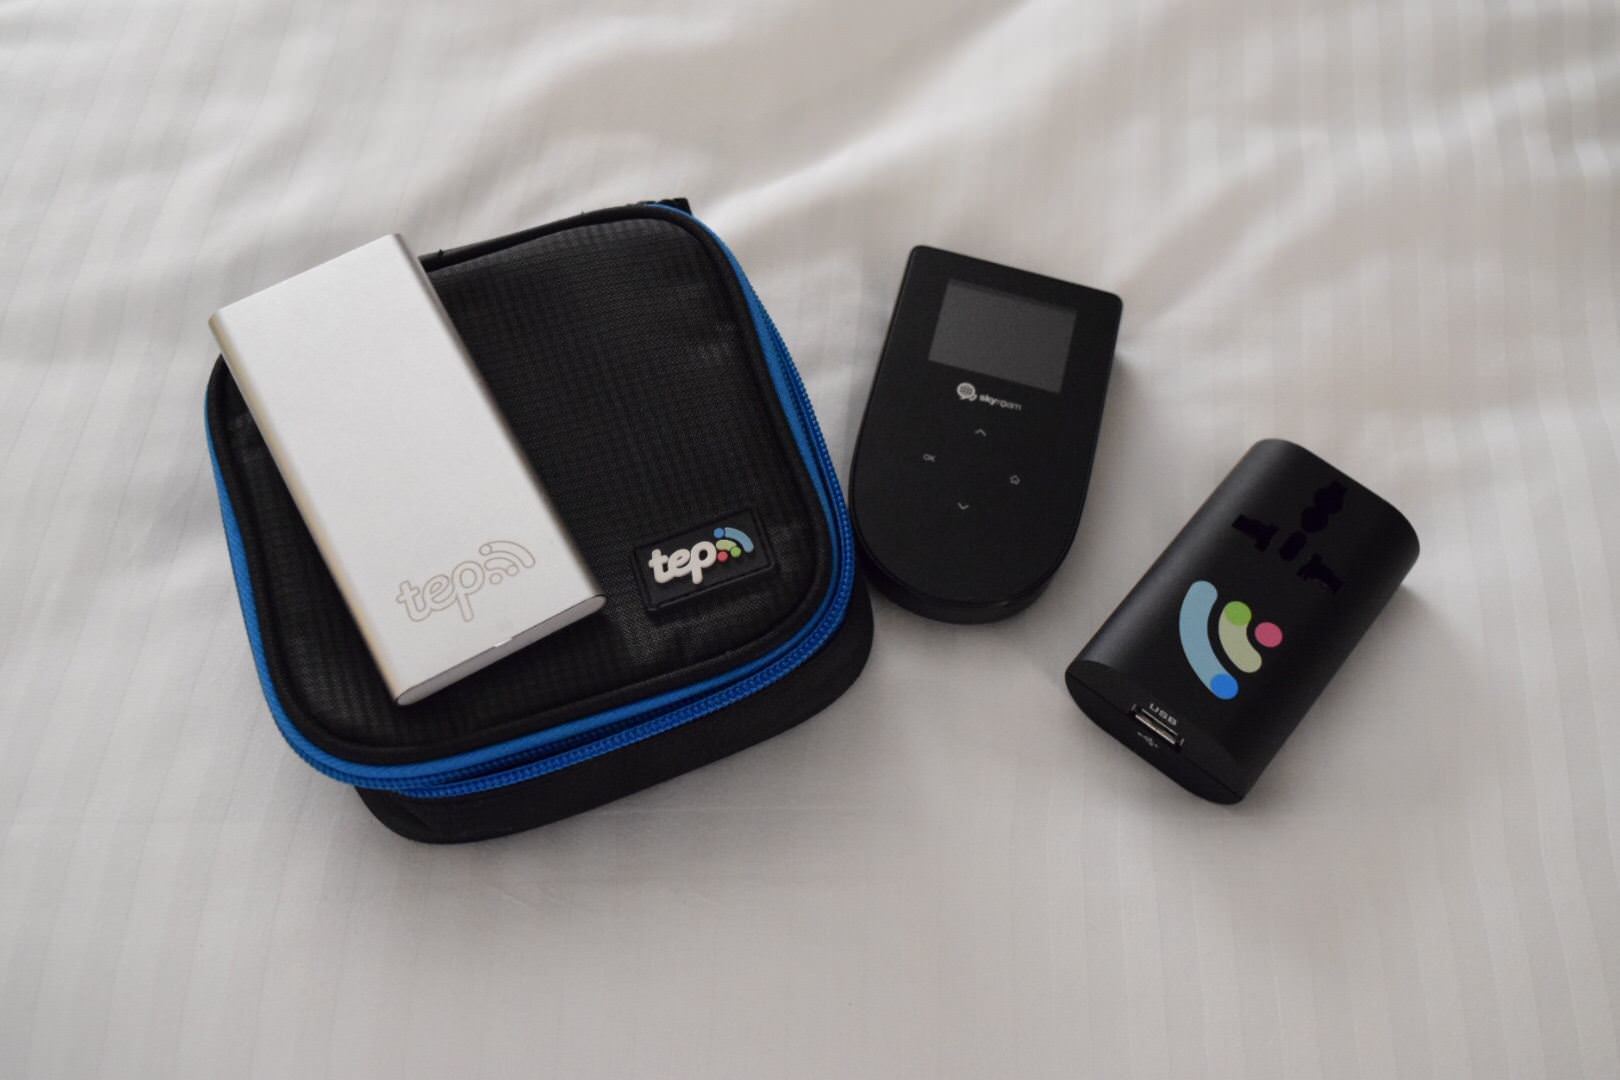 Road Trip in USA - Tep Wireless for Portable Internet